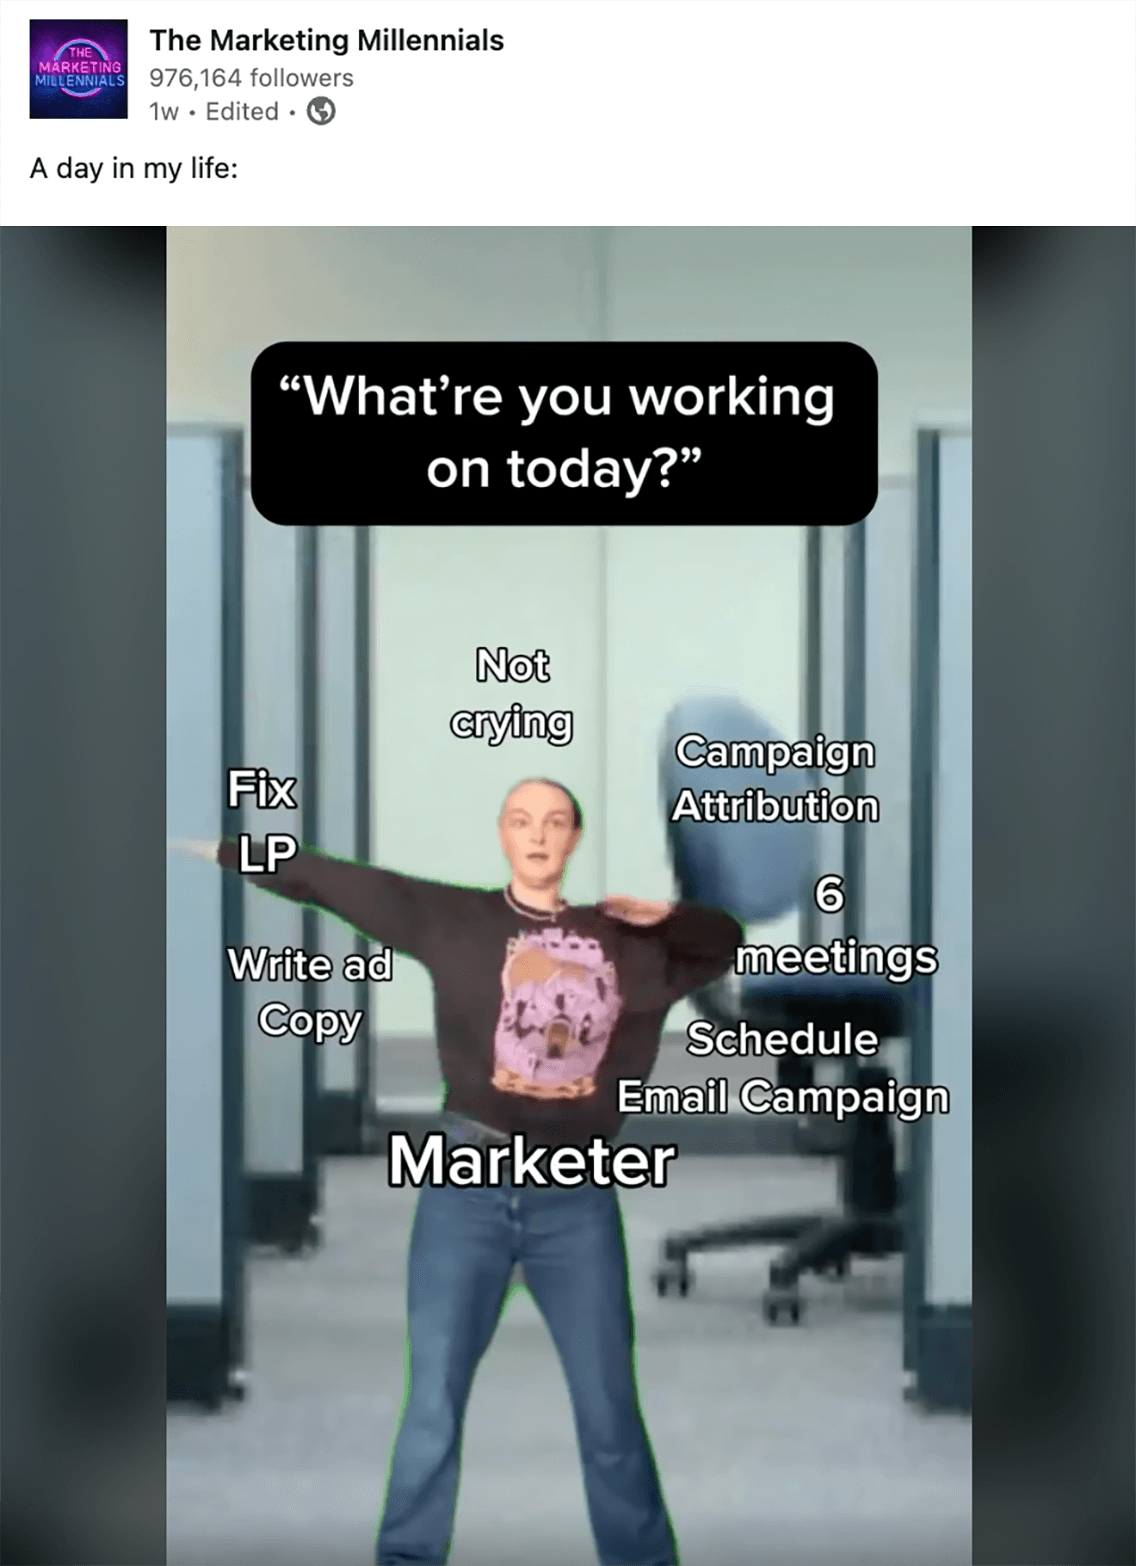 The Marketing Millennials on LinkedIn said, 'A day in my life:' with a video with a caption that says 'What're you working on today?' The person is waving their arms in all different directions pointing at things like, 'Fix LP,' 'Schedule campaign,' '6 meetings later,' 'Not crying'